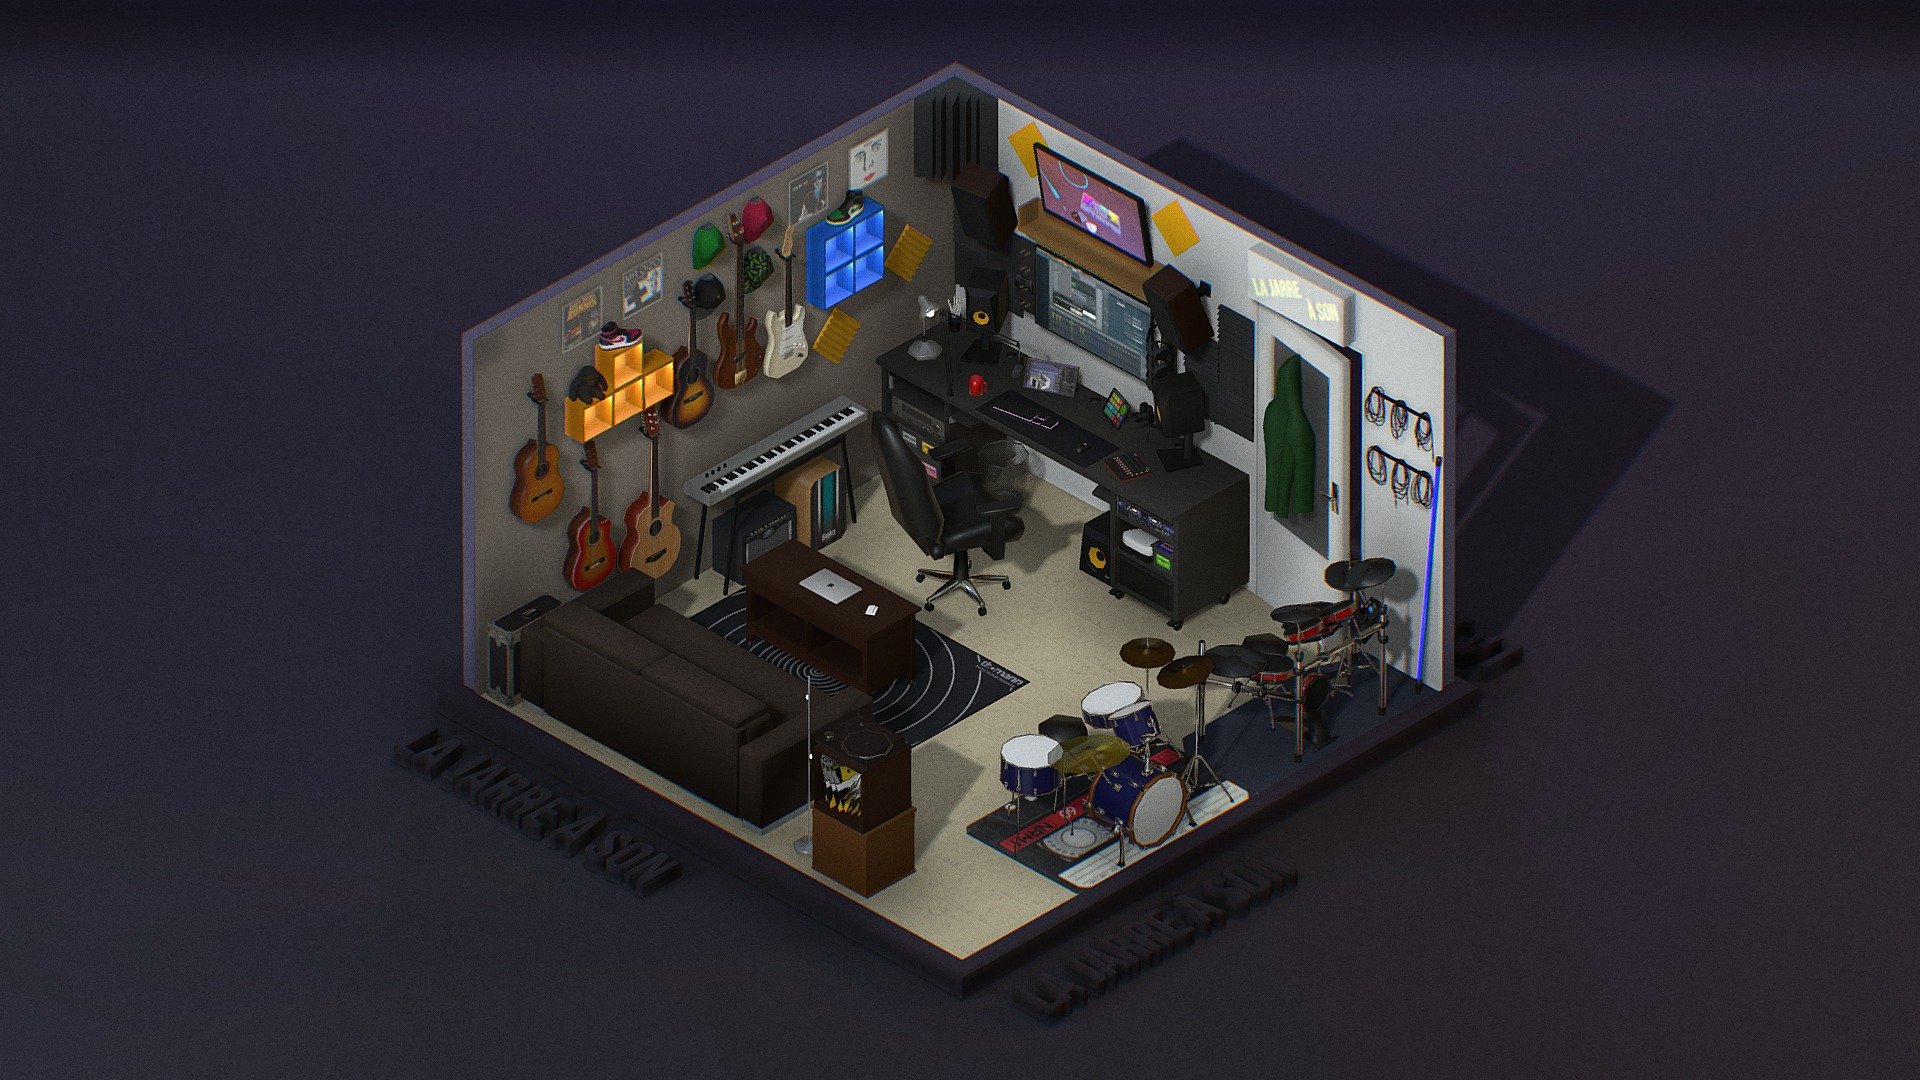 This is basically my bedroom, that i transformed into a home studio years ago.
During lockdown 2020, i started to make a lowpoly version, which became a basis for my website.

Made in Blender 2.93 - La Jarre à Son - Low Poly Home Studio - 3D model by La Jarre à Son (@la_jarre_a_son) 3d model